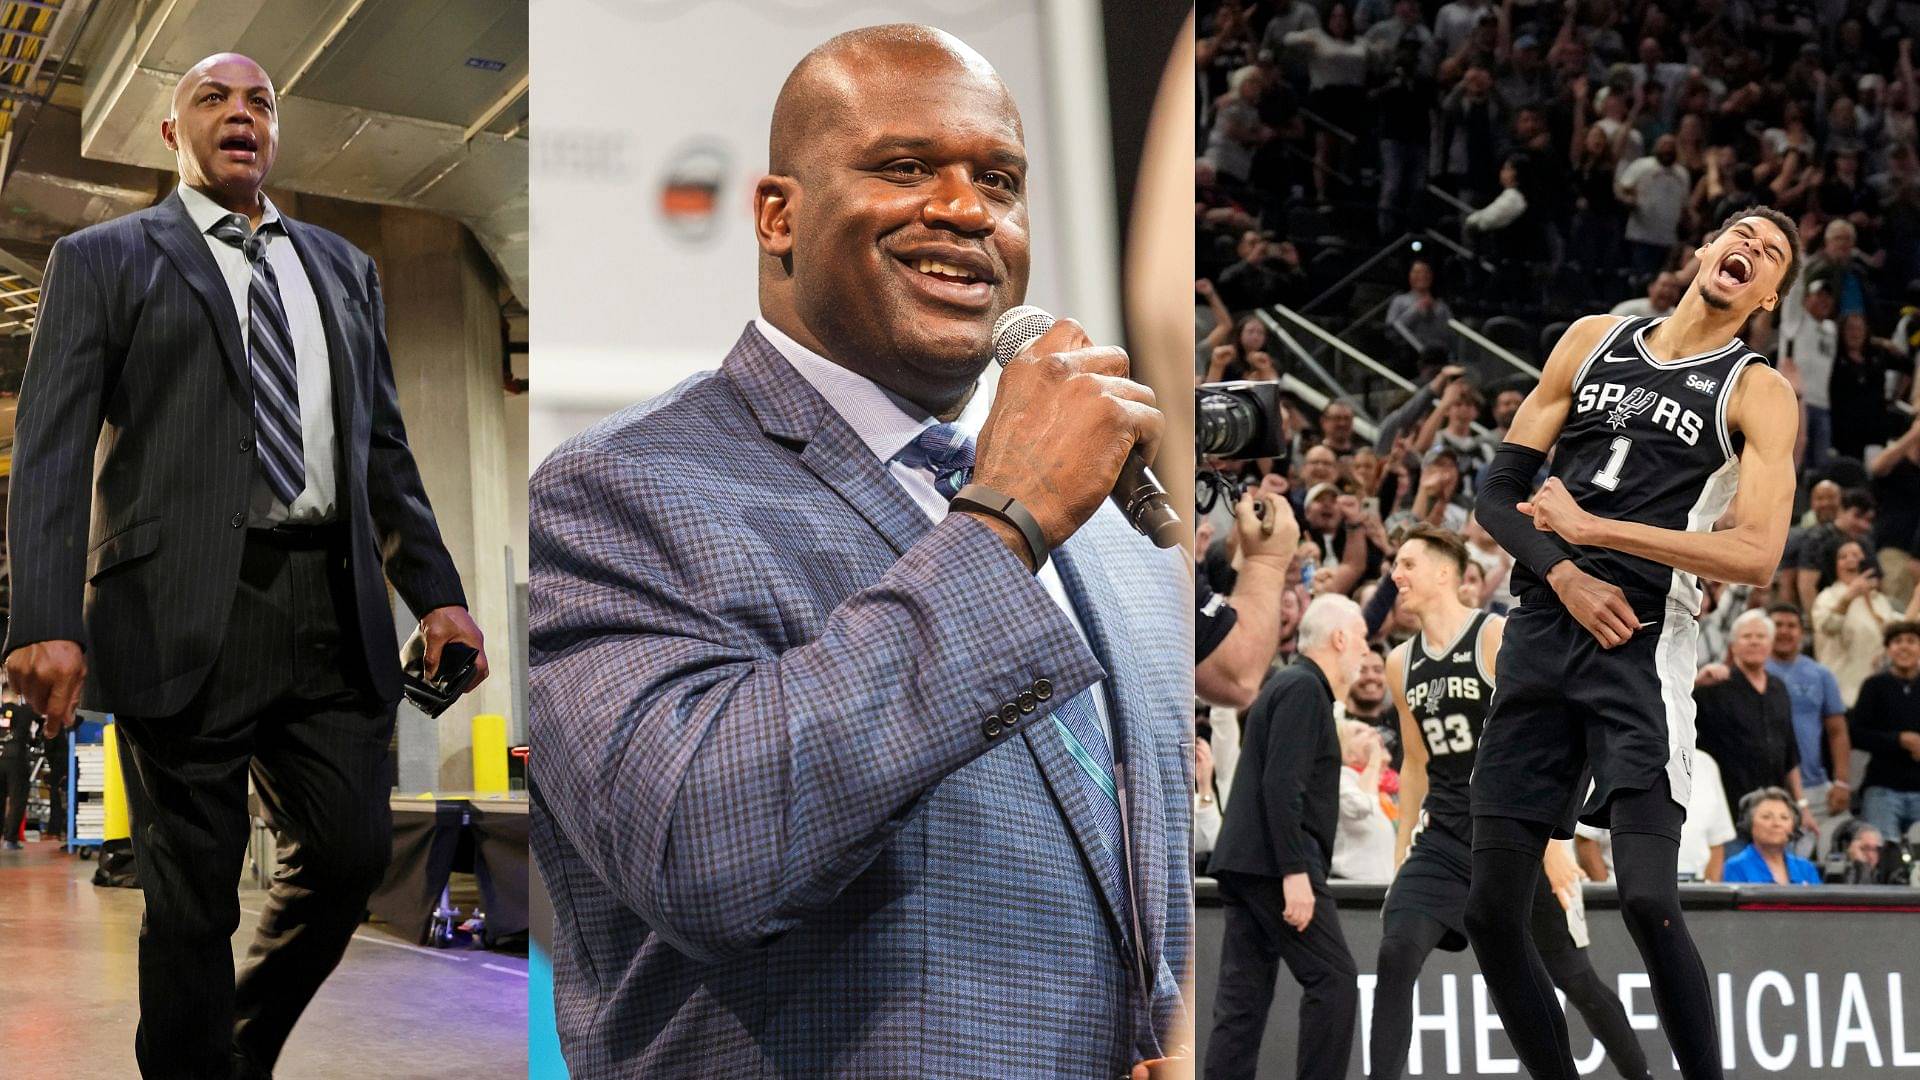 “Is That The Only Phrase You Know?”: Charles Barkley Goes At Shaquille O’Neal’s Butchered French Amidst Victor Wembanyama’s ROTY Celebration